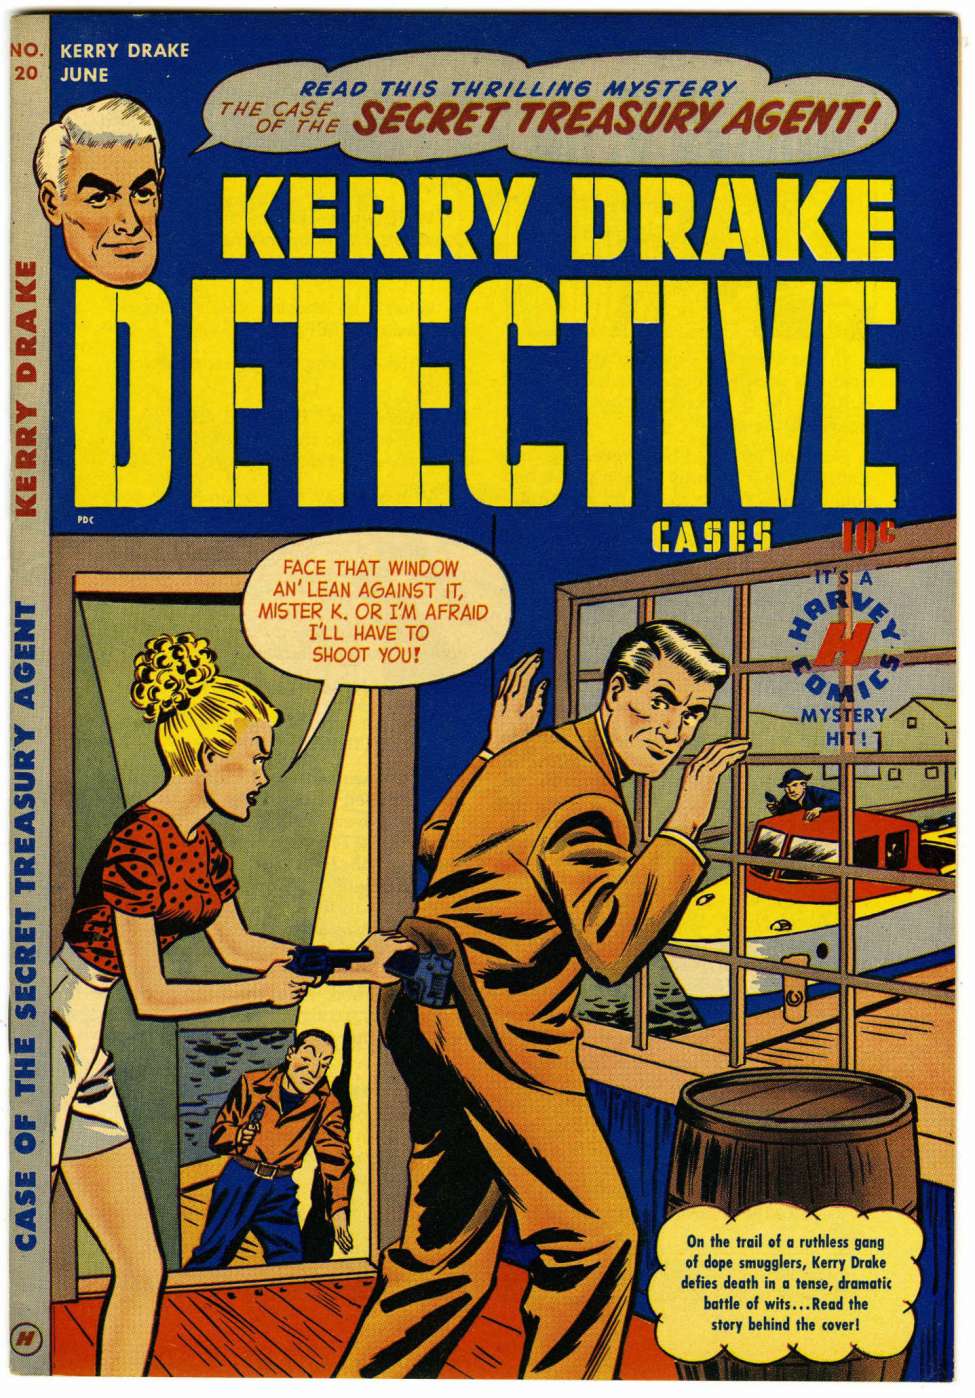 Book Cover For Kerry Drake Detective Cases 20